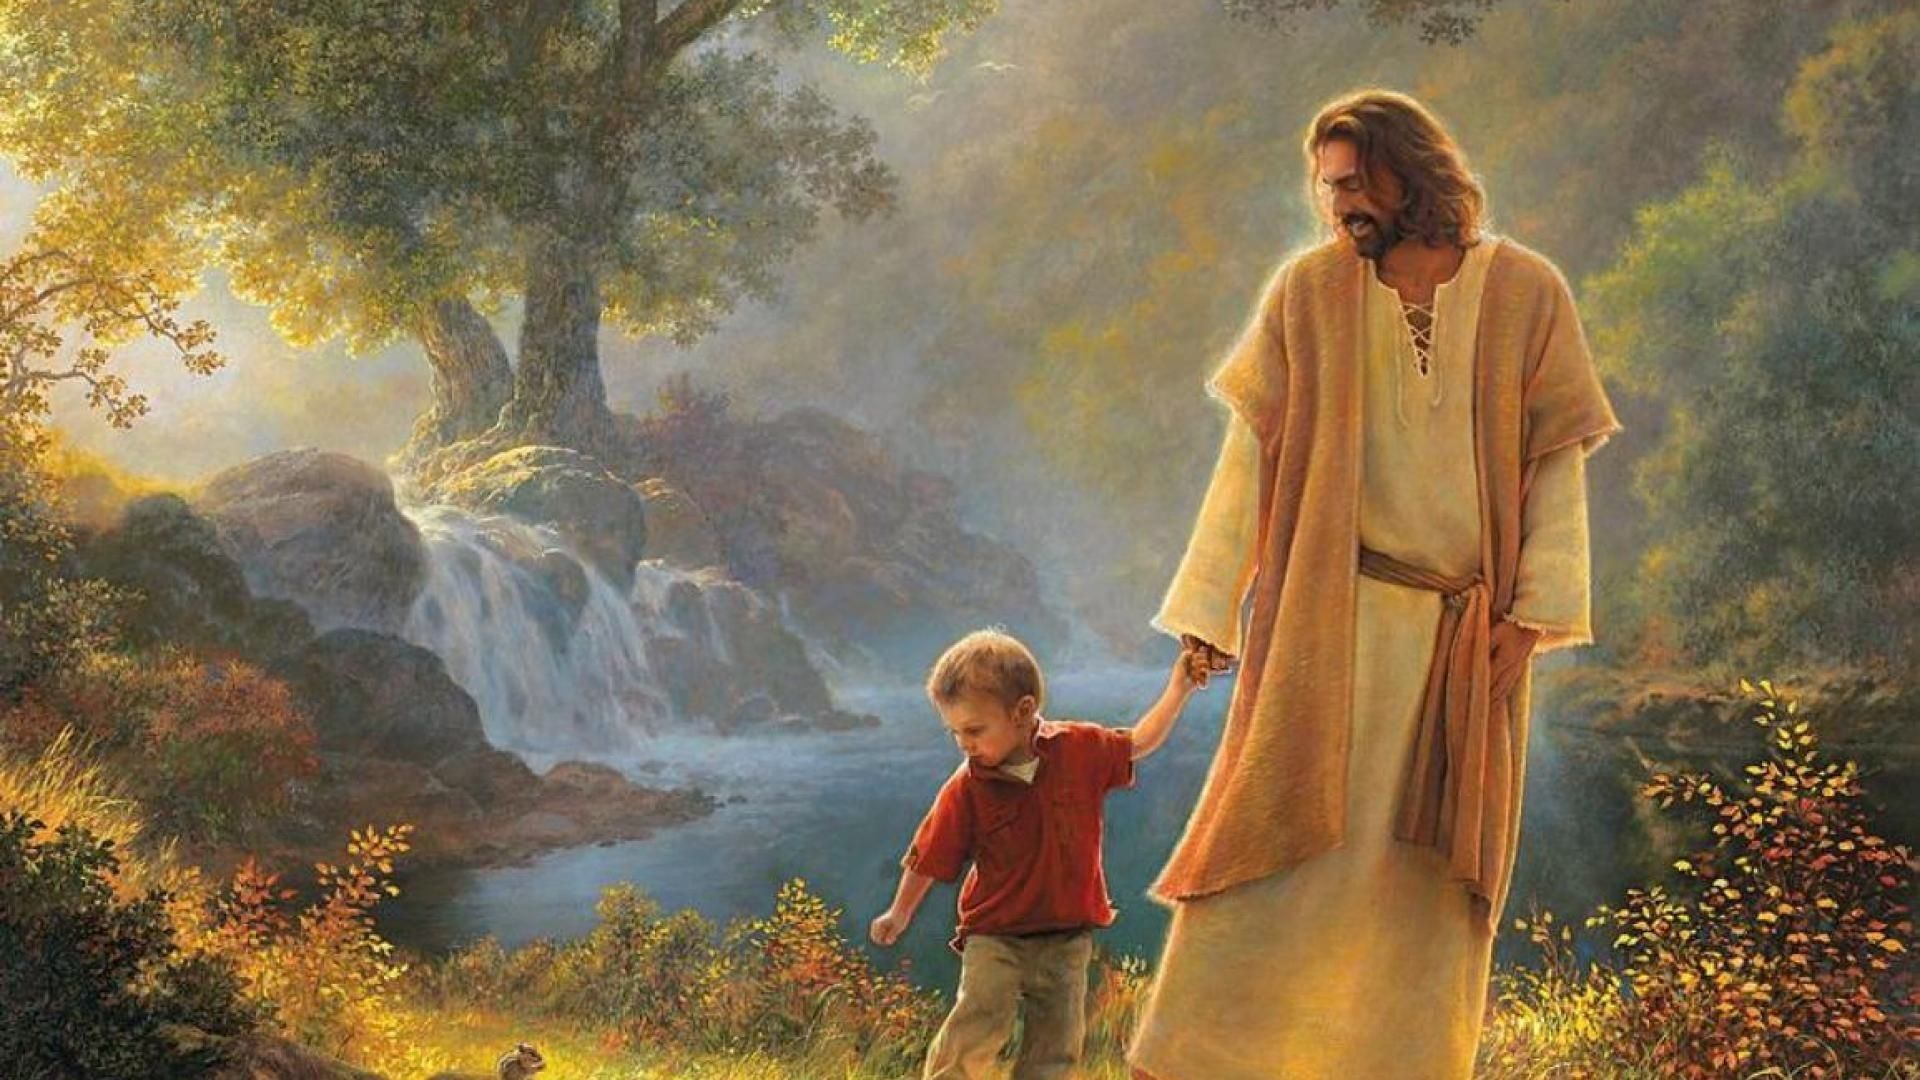 Jesus walking with a child in a forest - Jesus